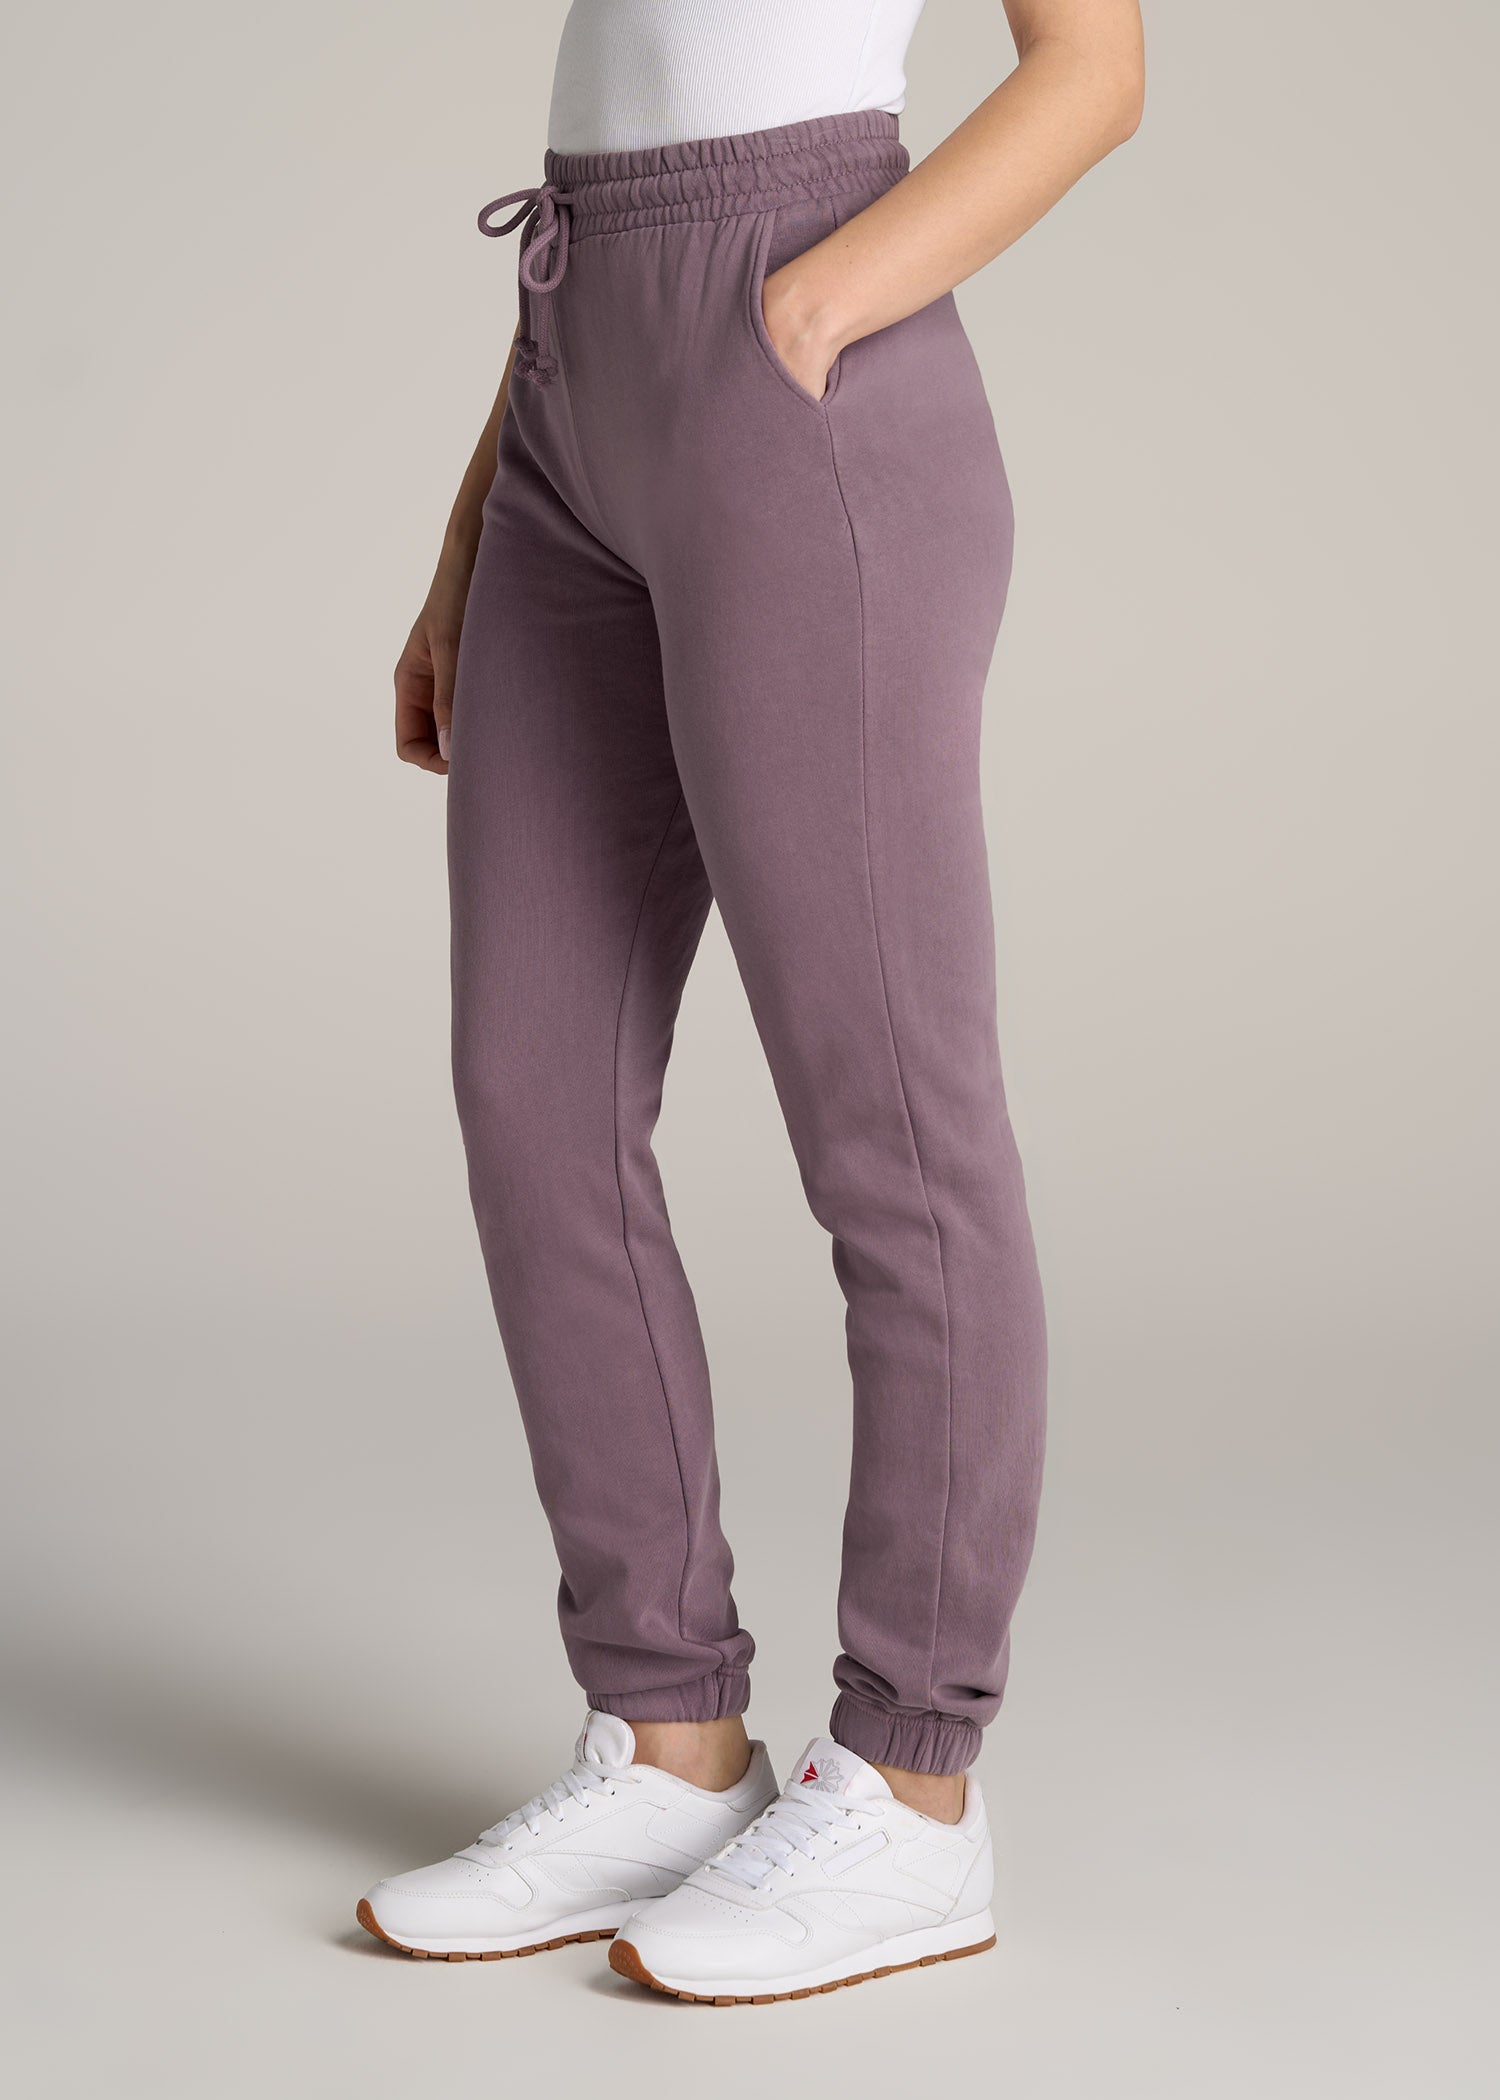 Women's Tall Wearever High-Waisted Garment-Dyed Sweatpants Smoked